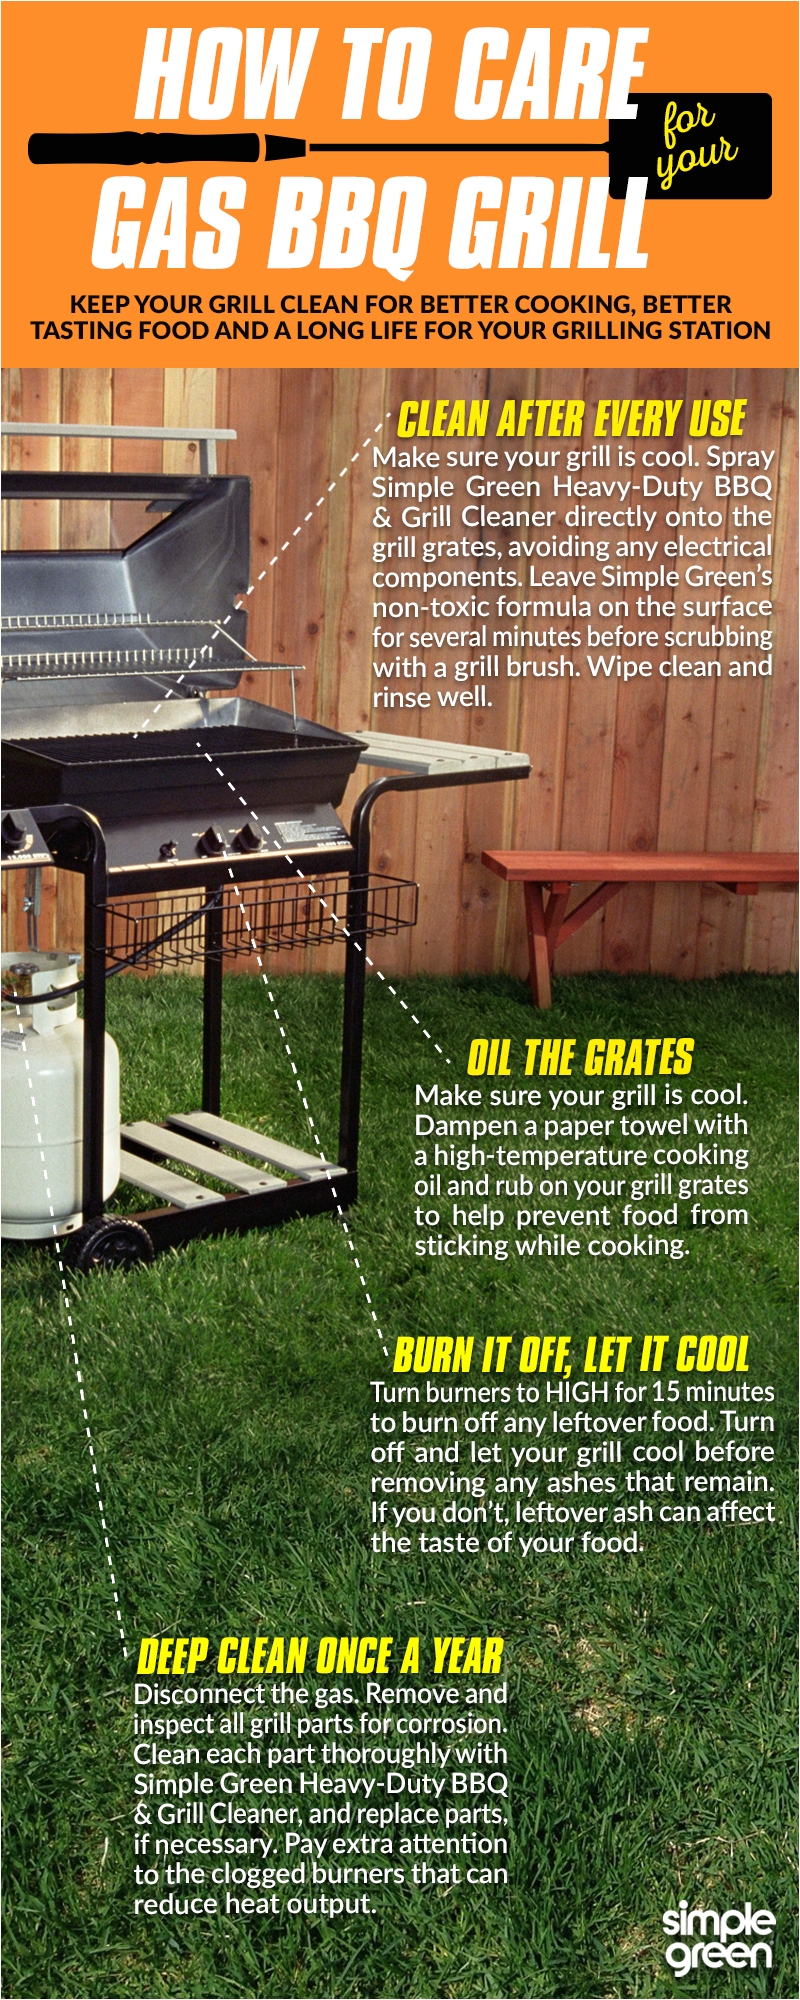 keep your bbq grill clean for better cooking better tasting food and a long life for your gas bbq grill